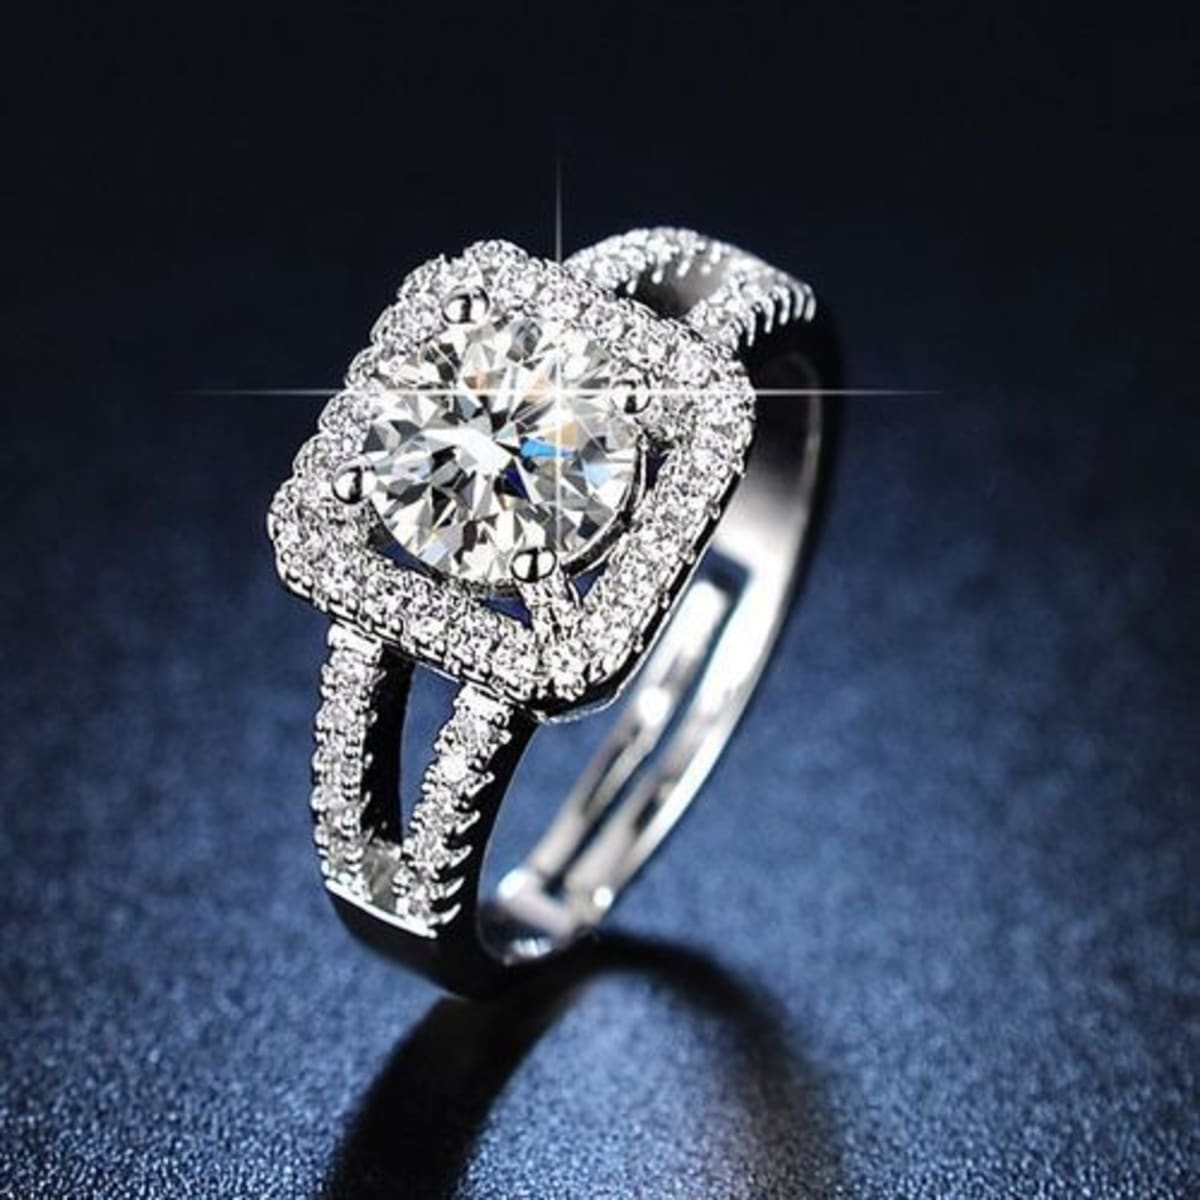 Adjustable Diamond Engagement Ring With Free Case - Sterling Silver